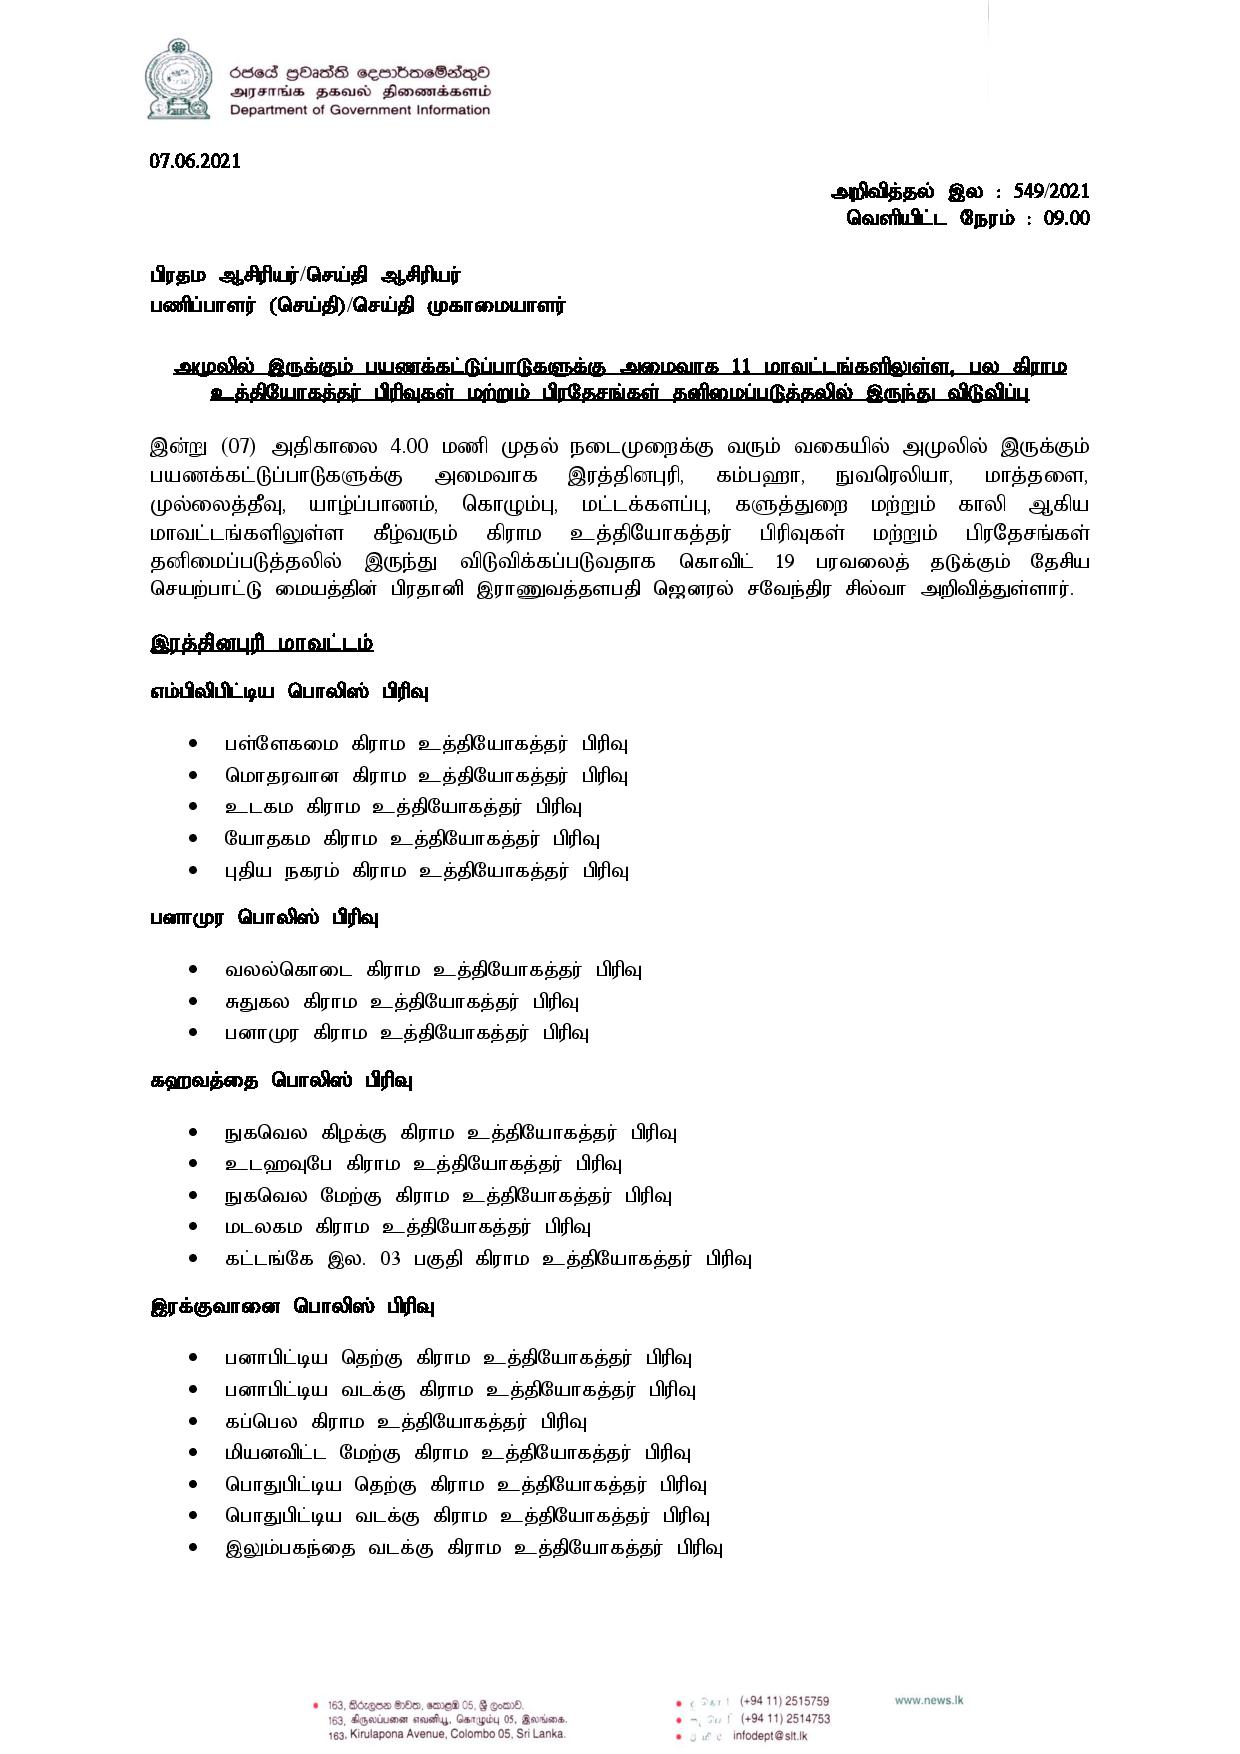 Press Release 549 Tamil 1 page 001